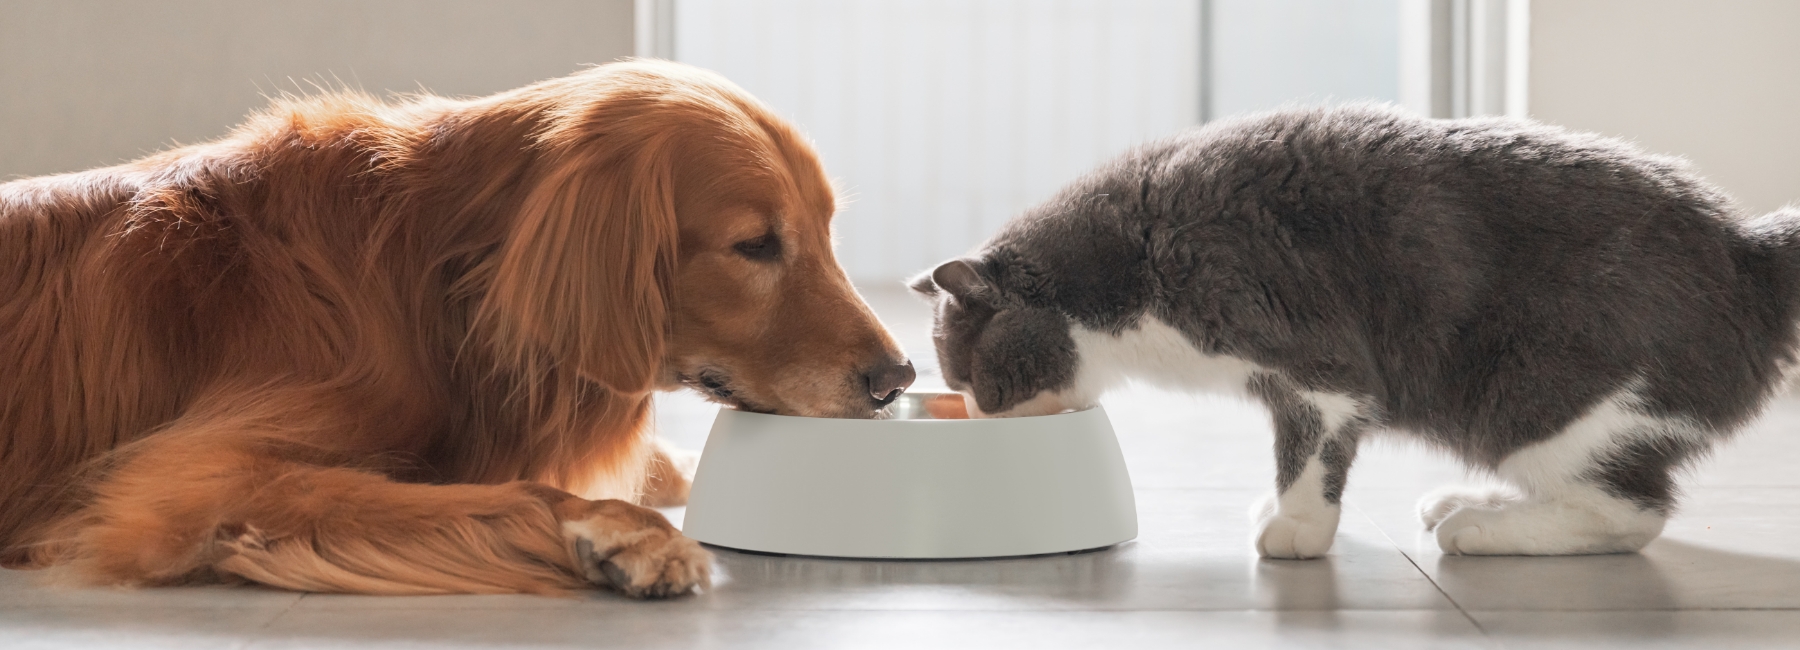 A dog and a cat eating from the same bowl